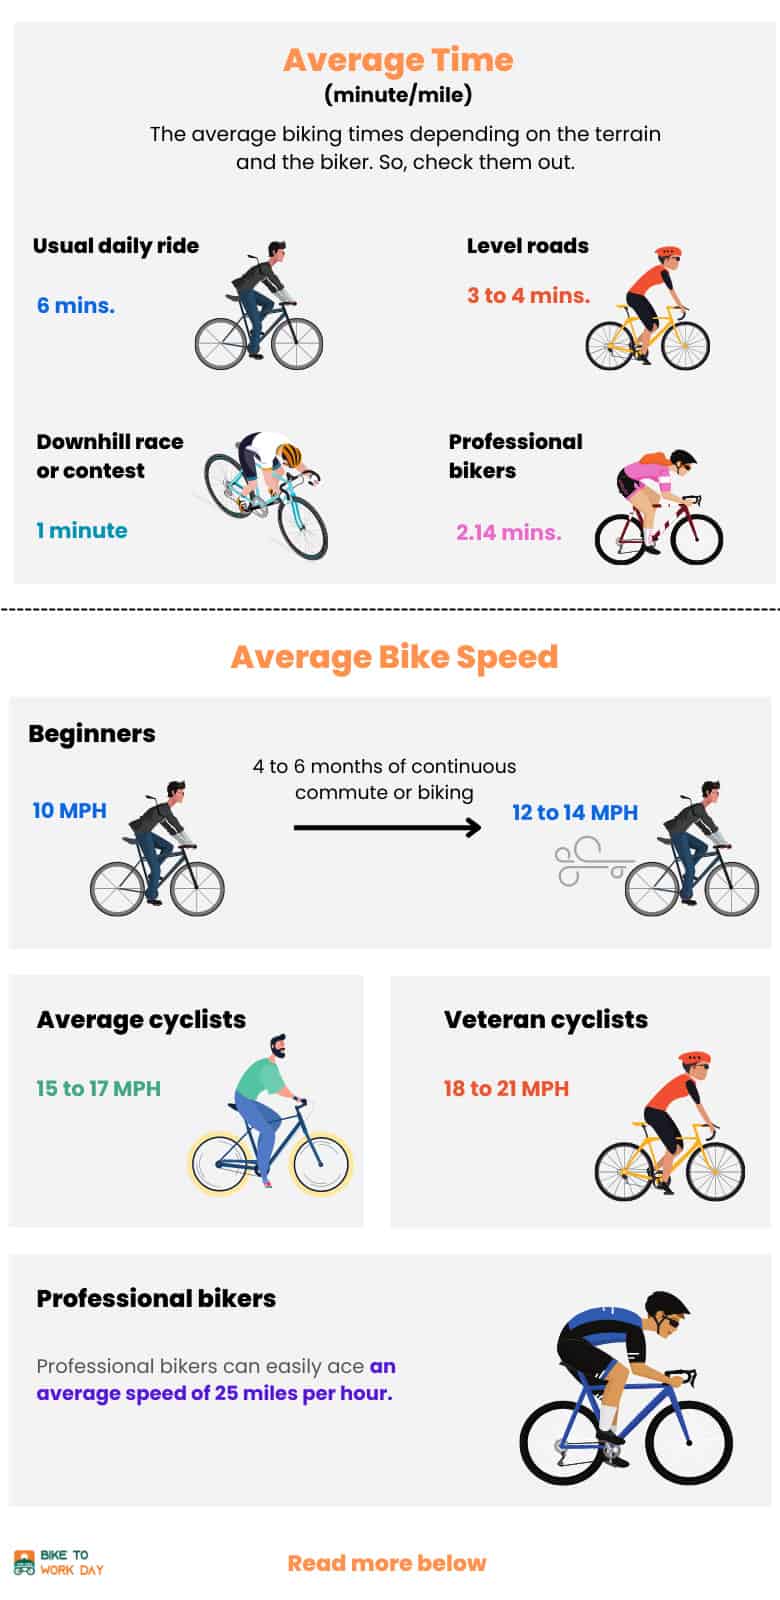 Long Does Take to Bike a Mile? The Average Time